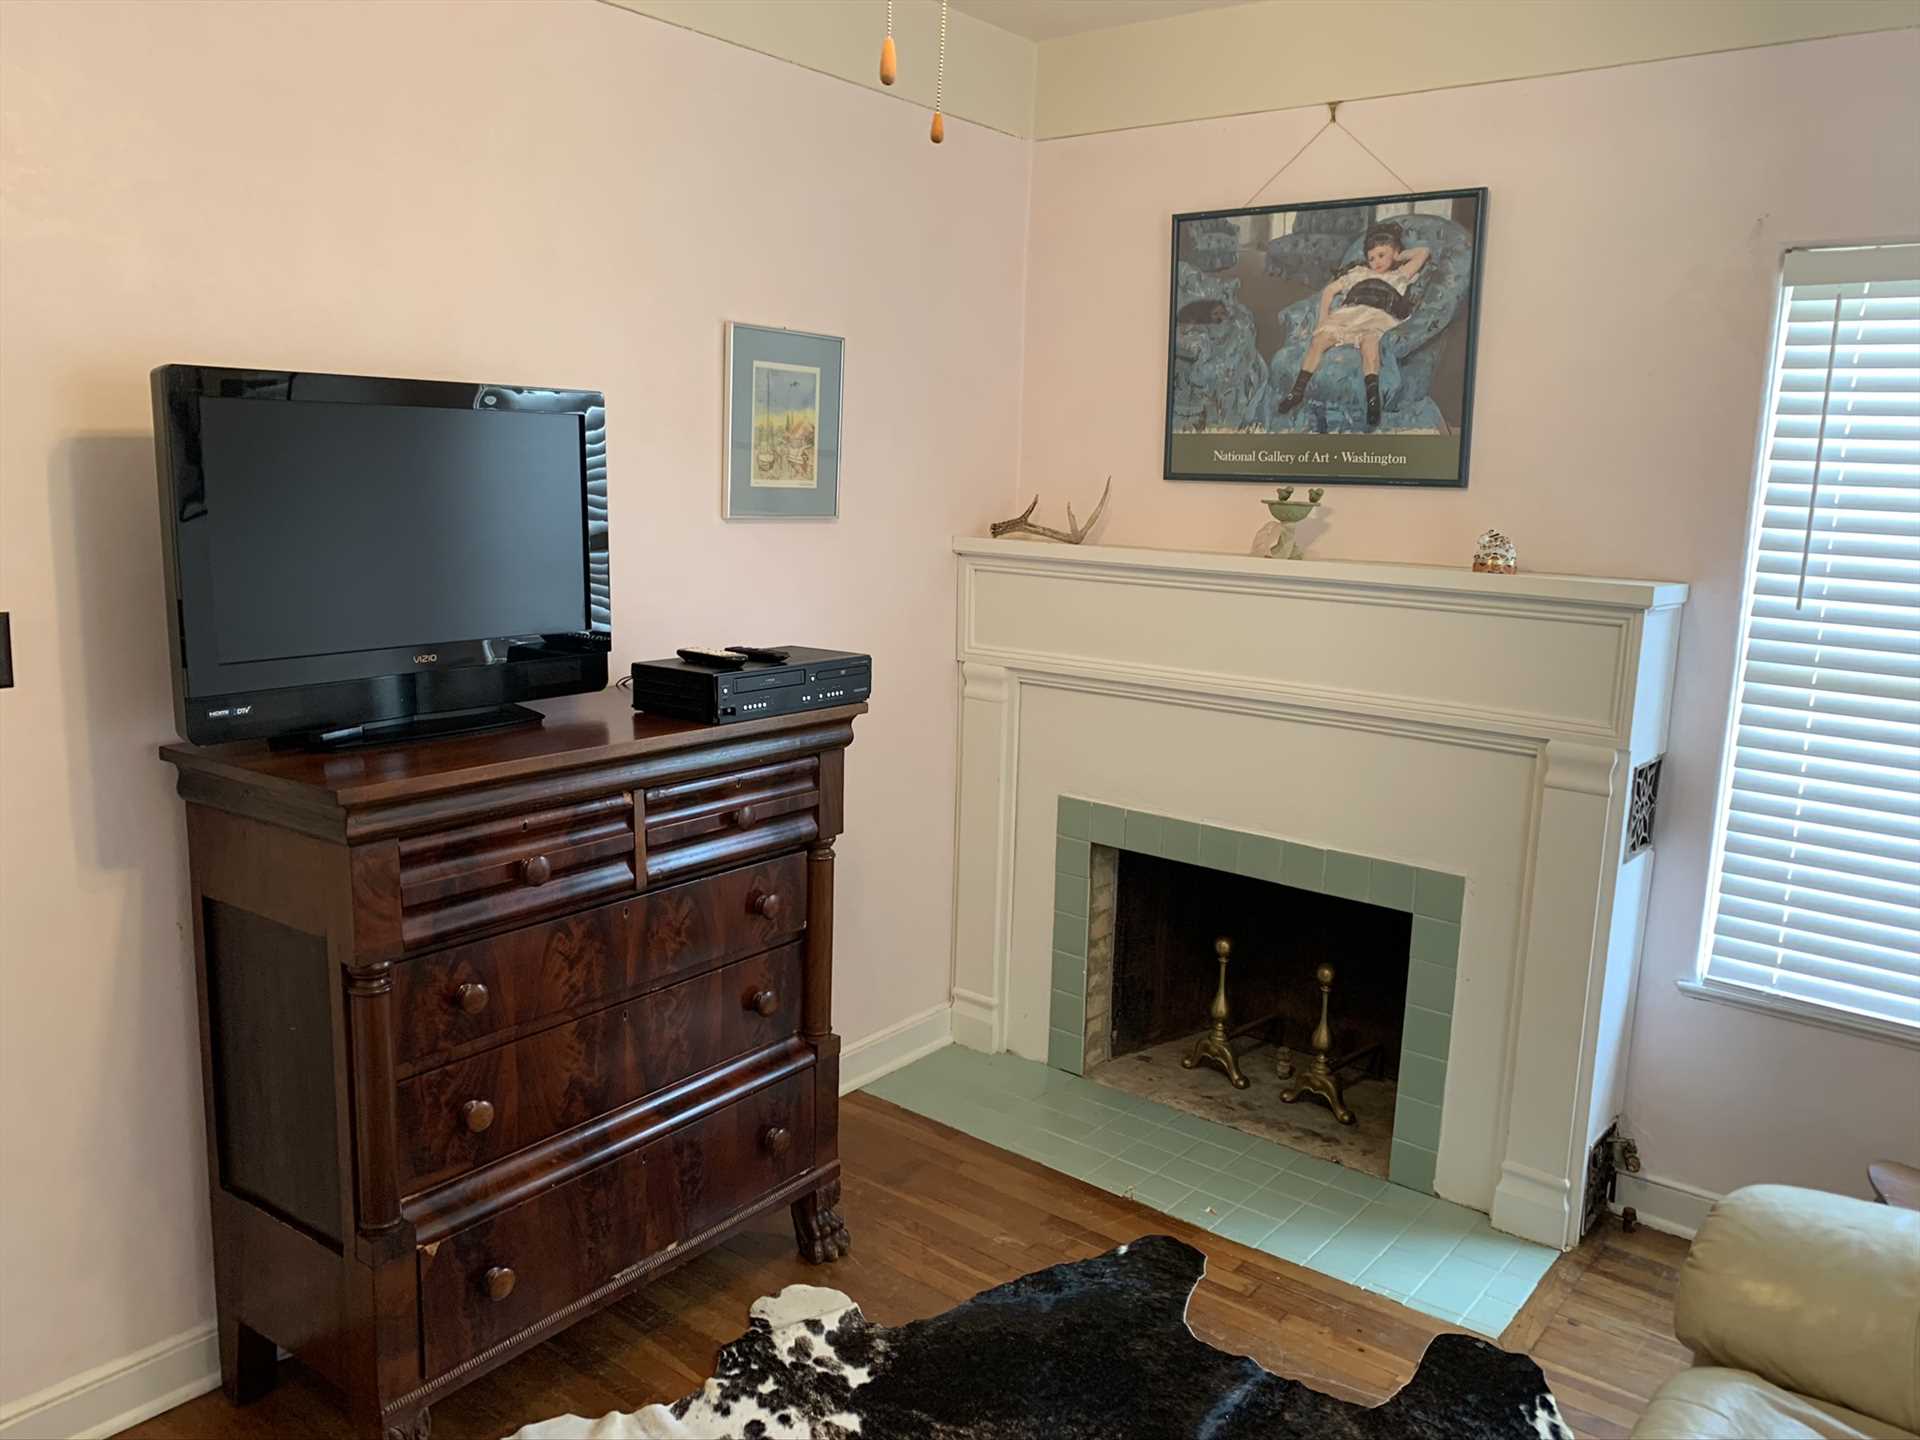                                                 The upstairs TV room includes a TV (thus the room's name!) with a DVD player, as well as Wifi Internet service.